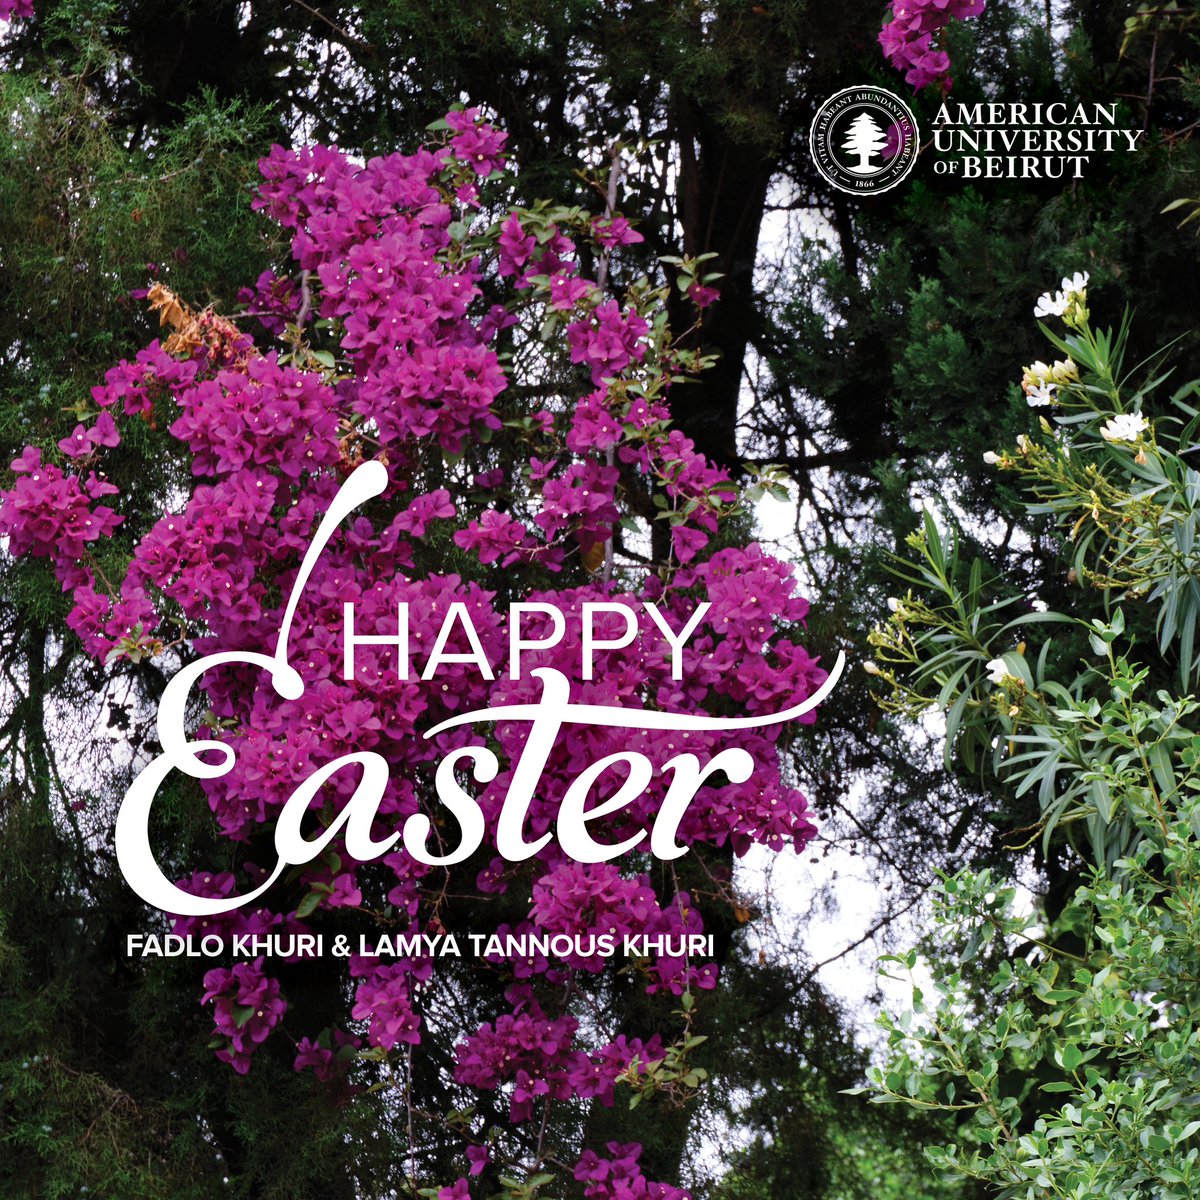 Happy Easter from Lamya and me. We continue to work and pray for better days and for peace on earth for all.